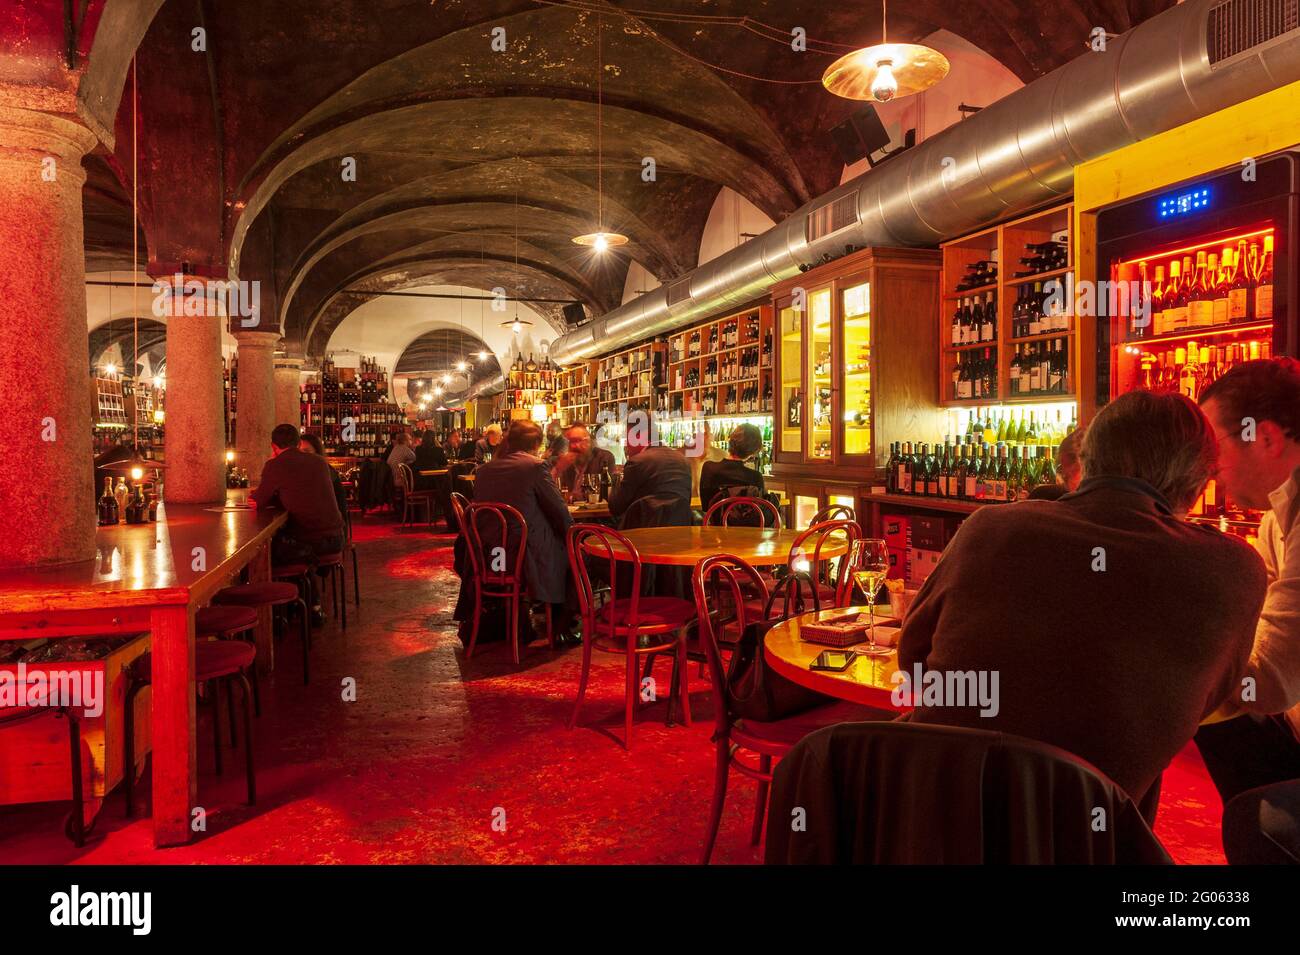 N’ombra de Vin, Cafè and Restaurant in Brera district, Milan, Lombardy, Italy, Europe Stock Photo